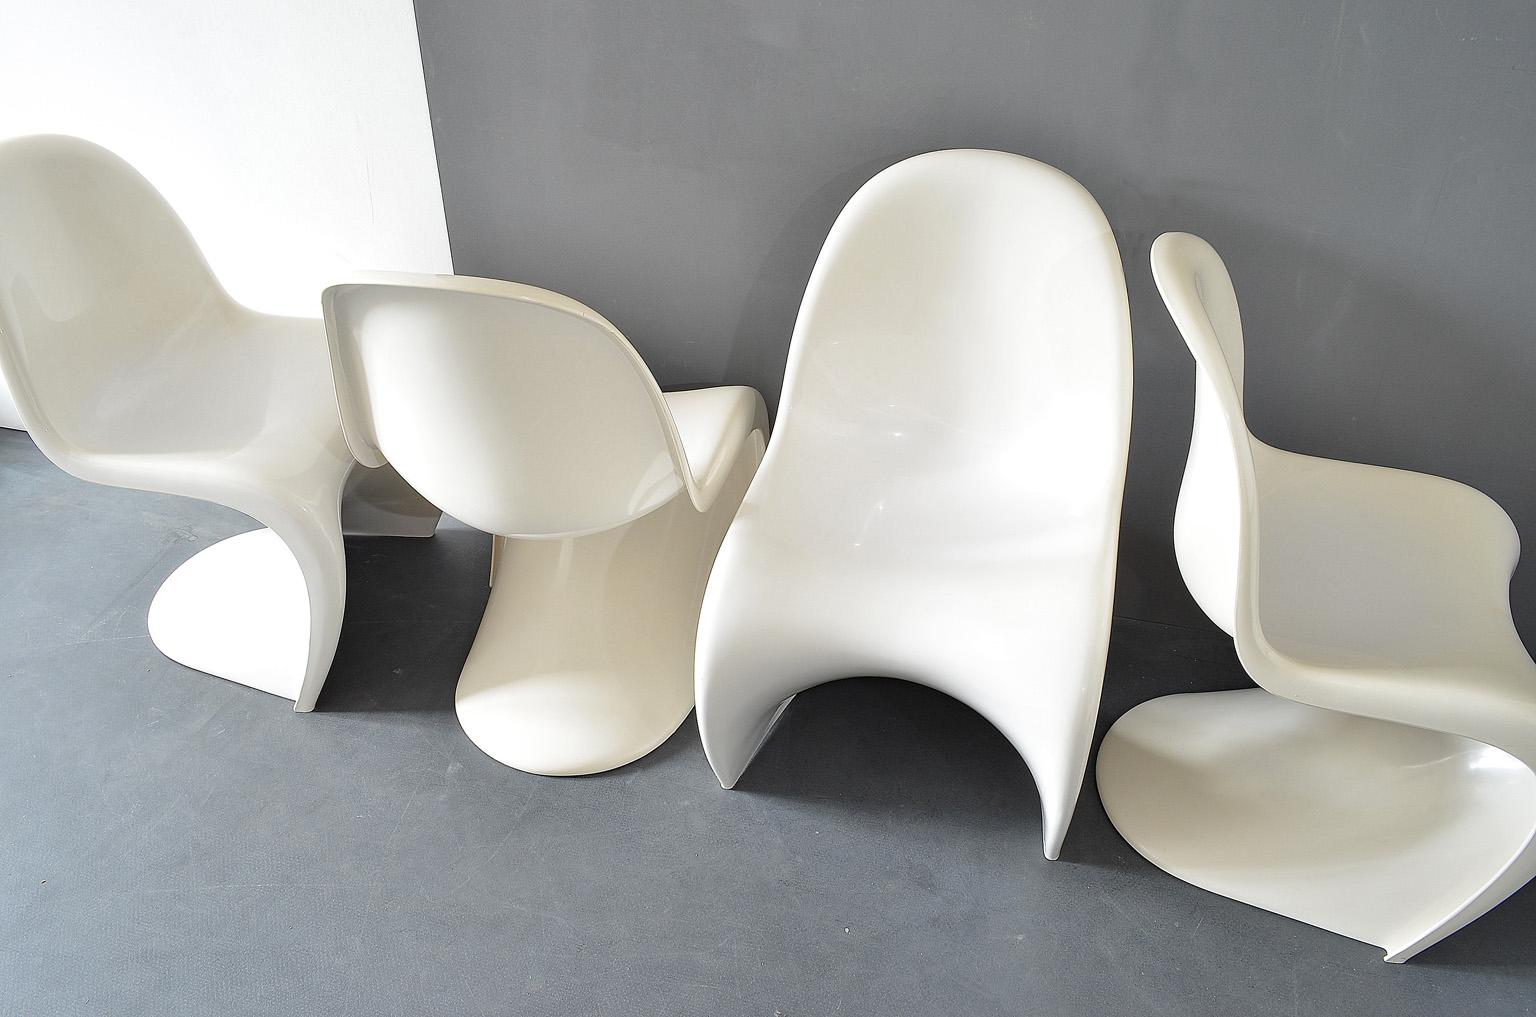 Set of four Panton chairs in white by Verner Panton for Fehlbaum / Hermann Miller, 1974. 
Version with reinforcement rips, Manufactures logo and date underneath.